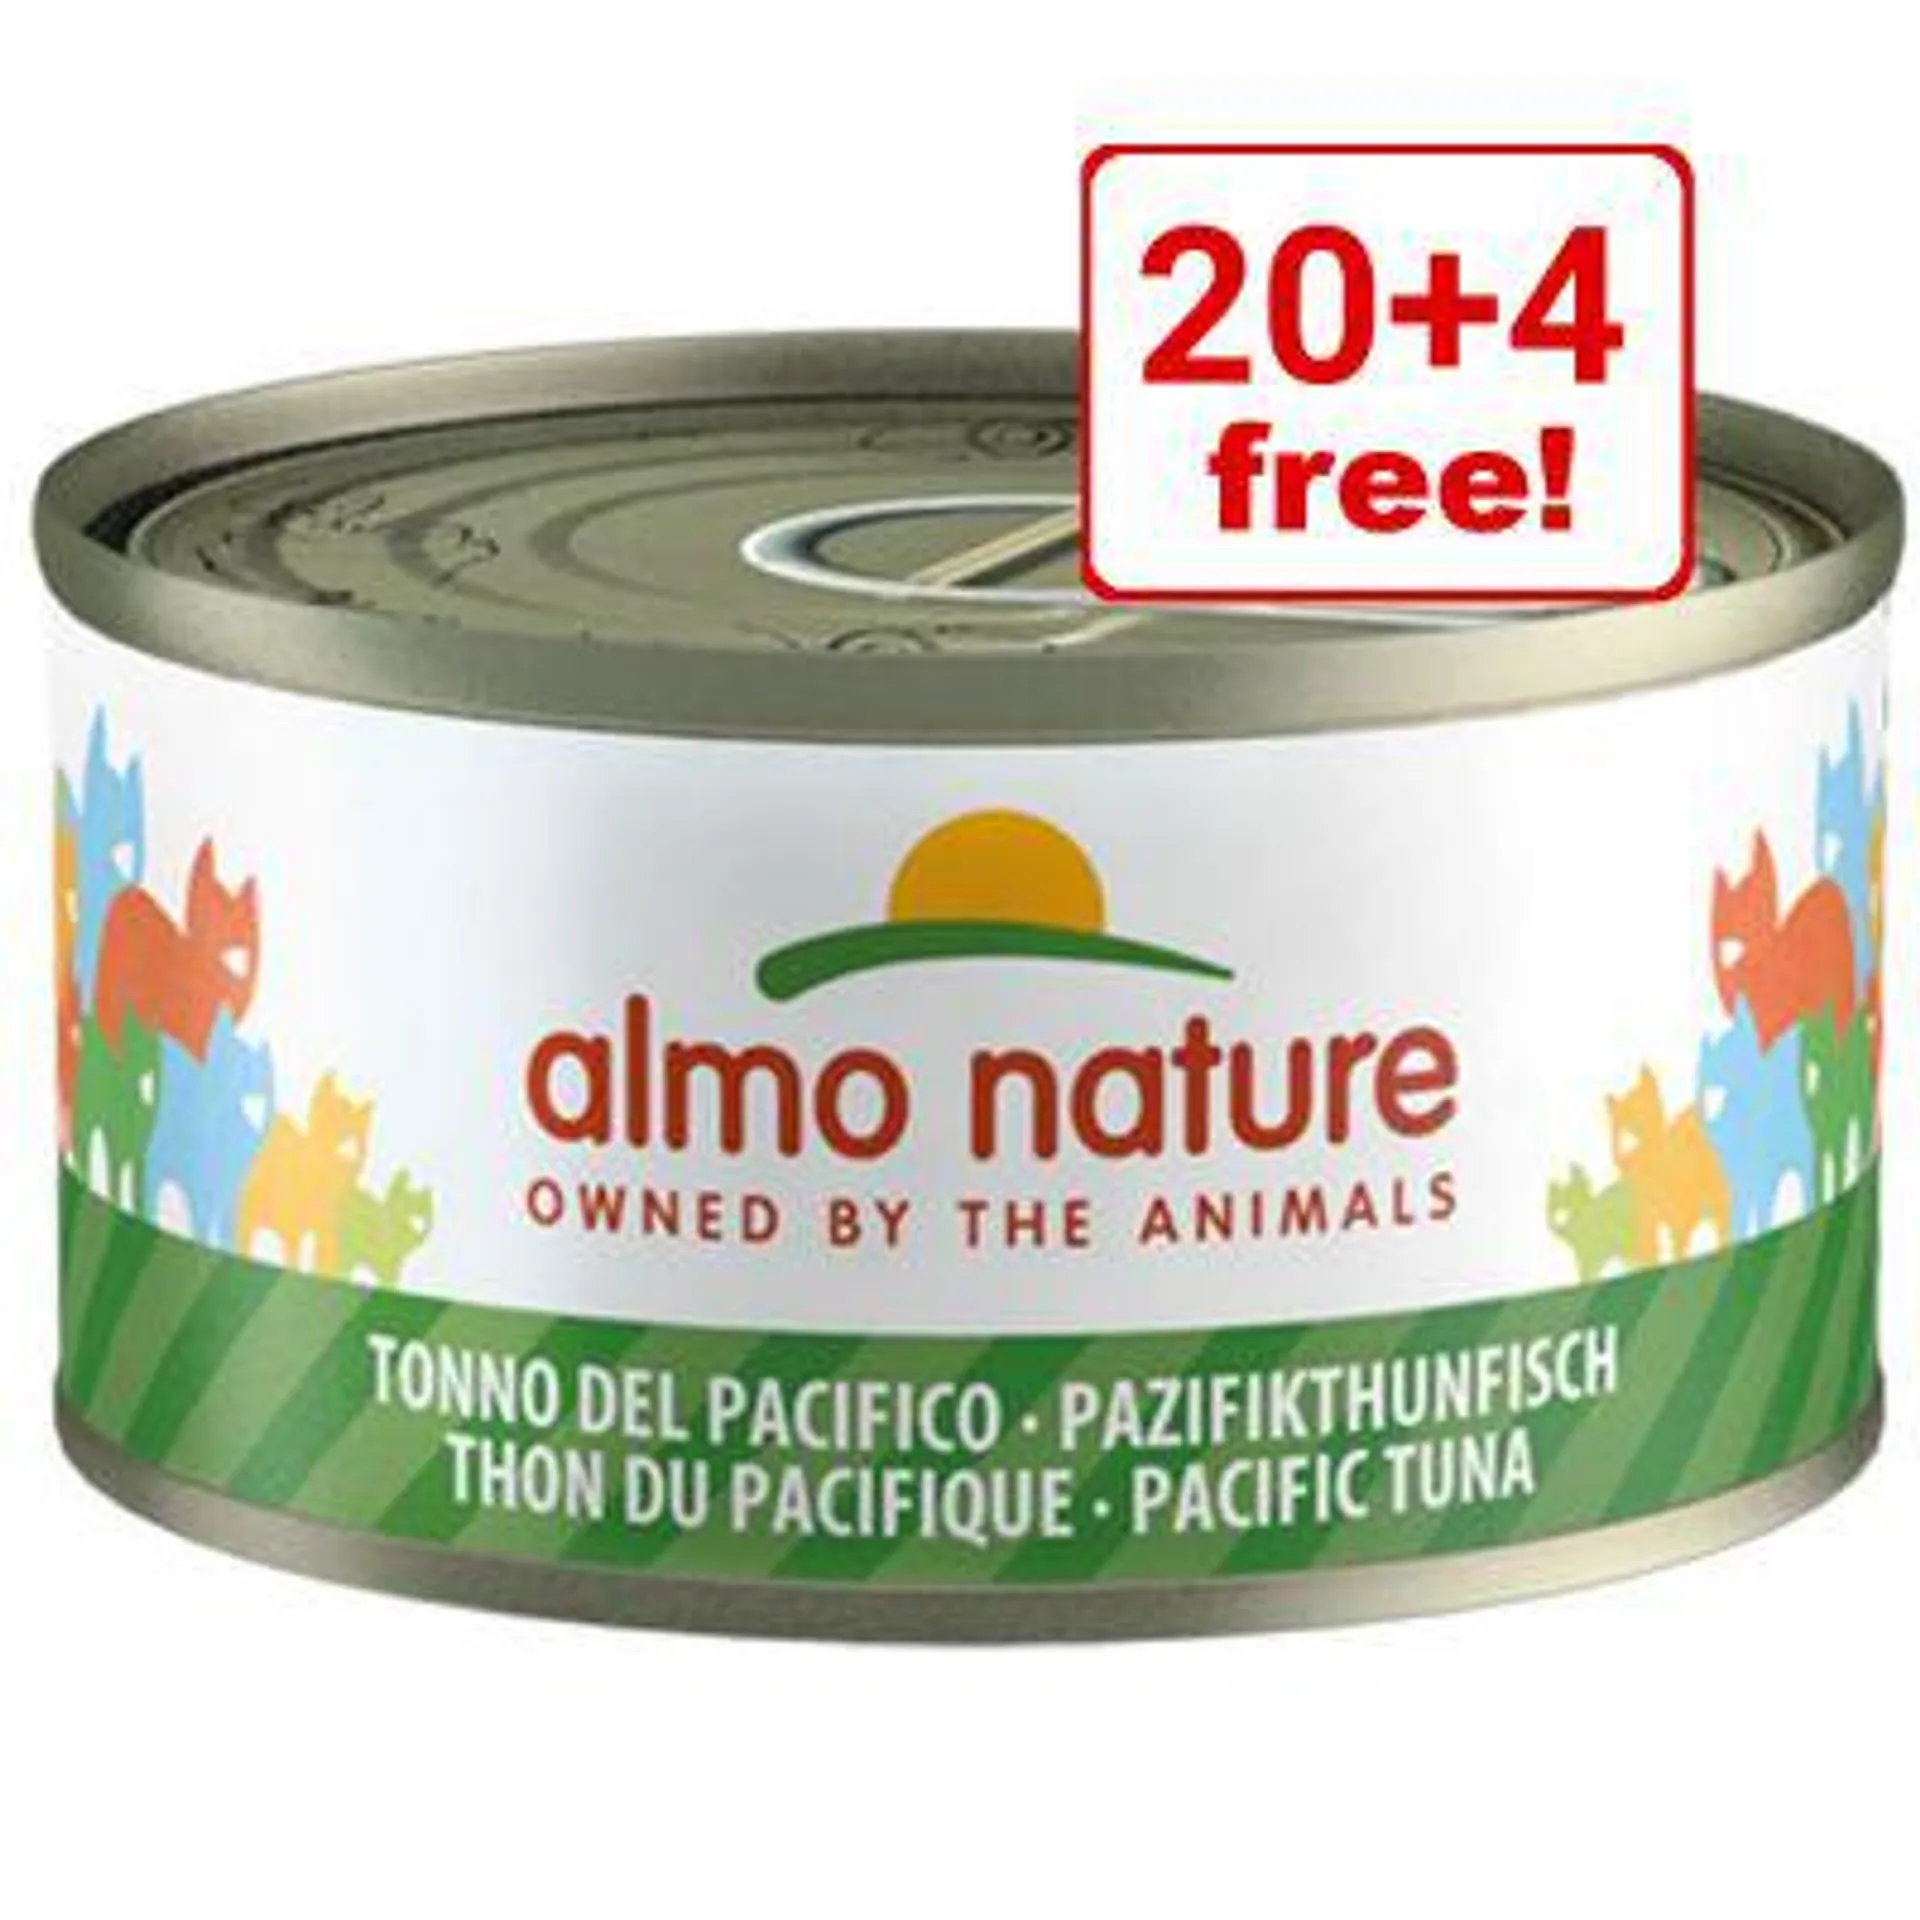 24 x 70g Almo Nature Wet Cat Food - 20 + 4 Free!*